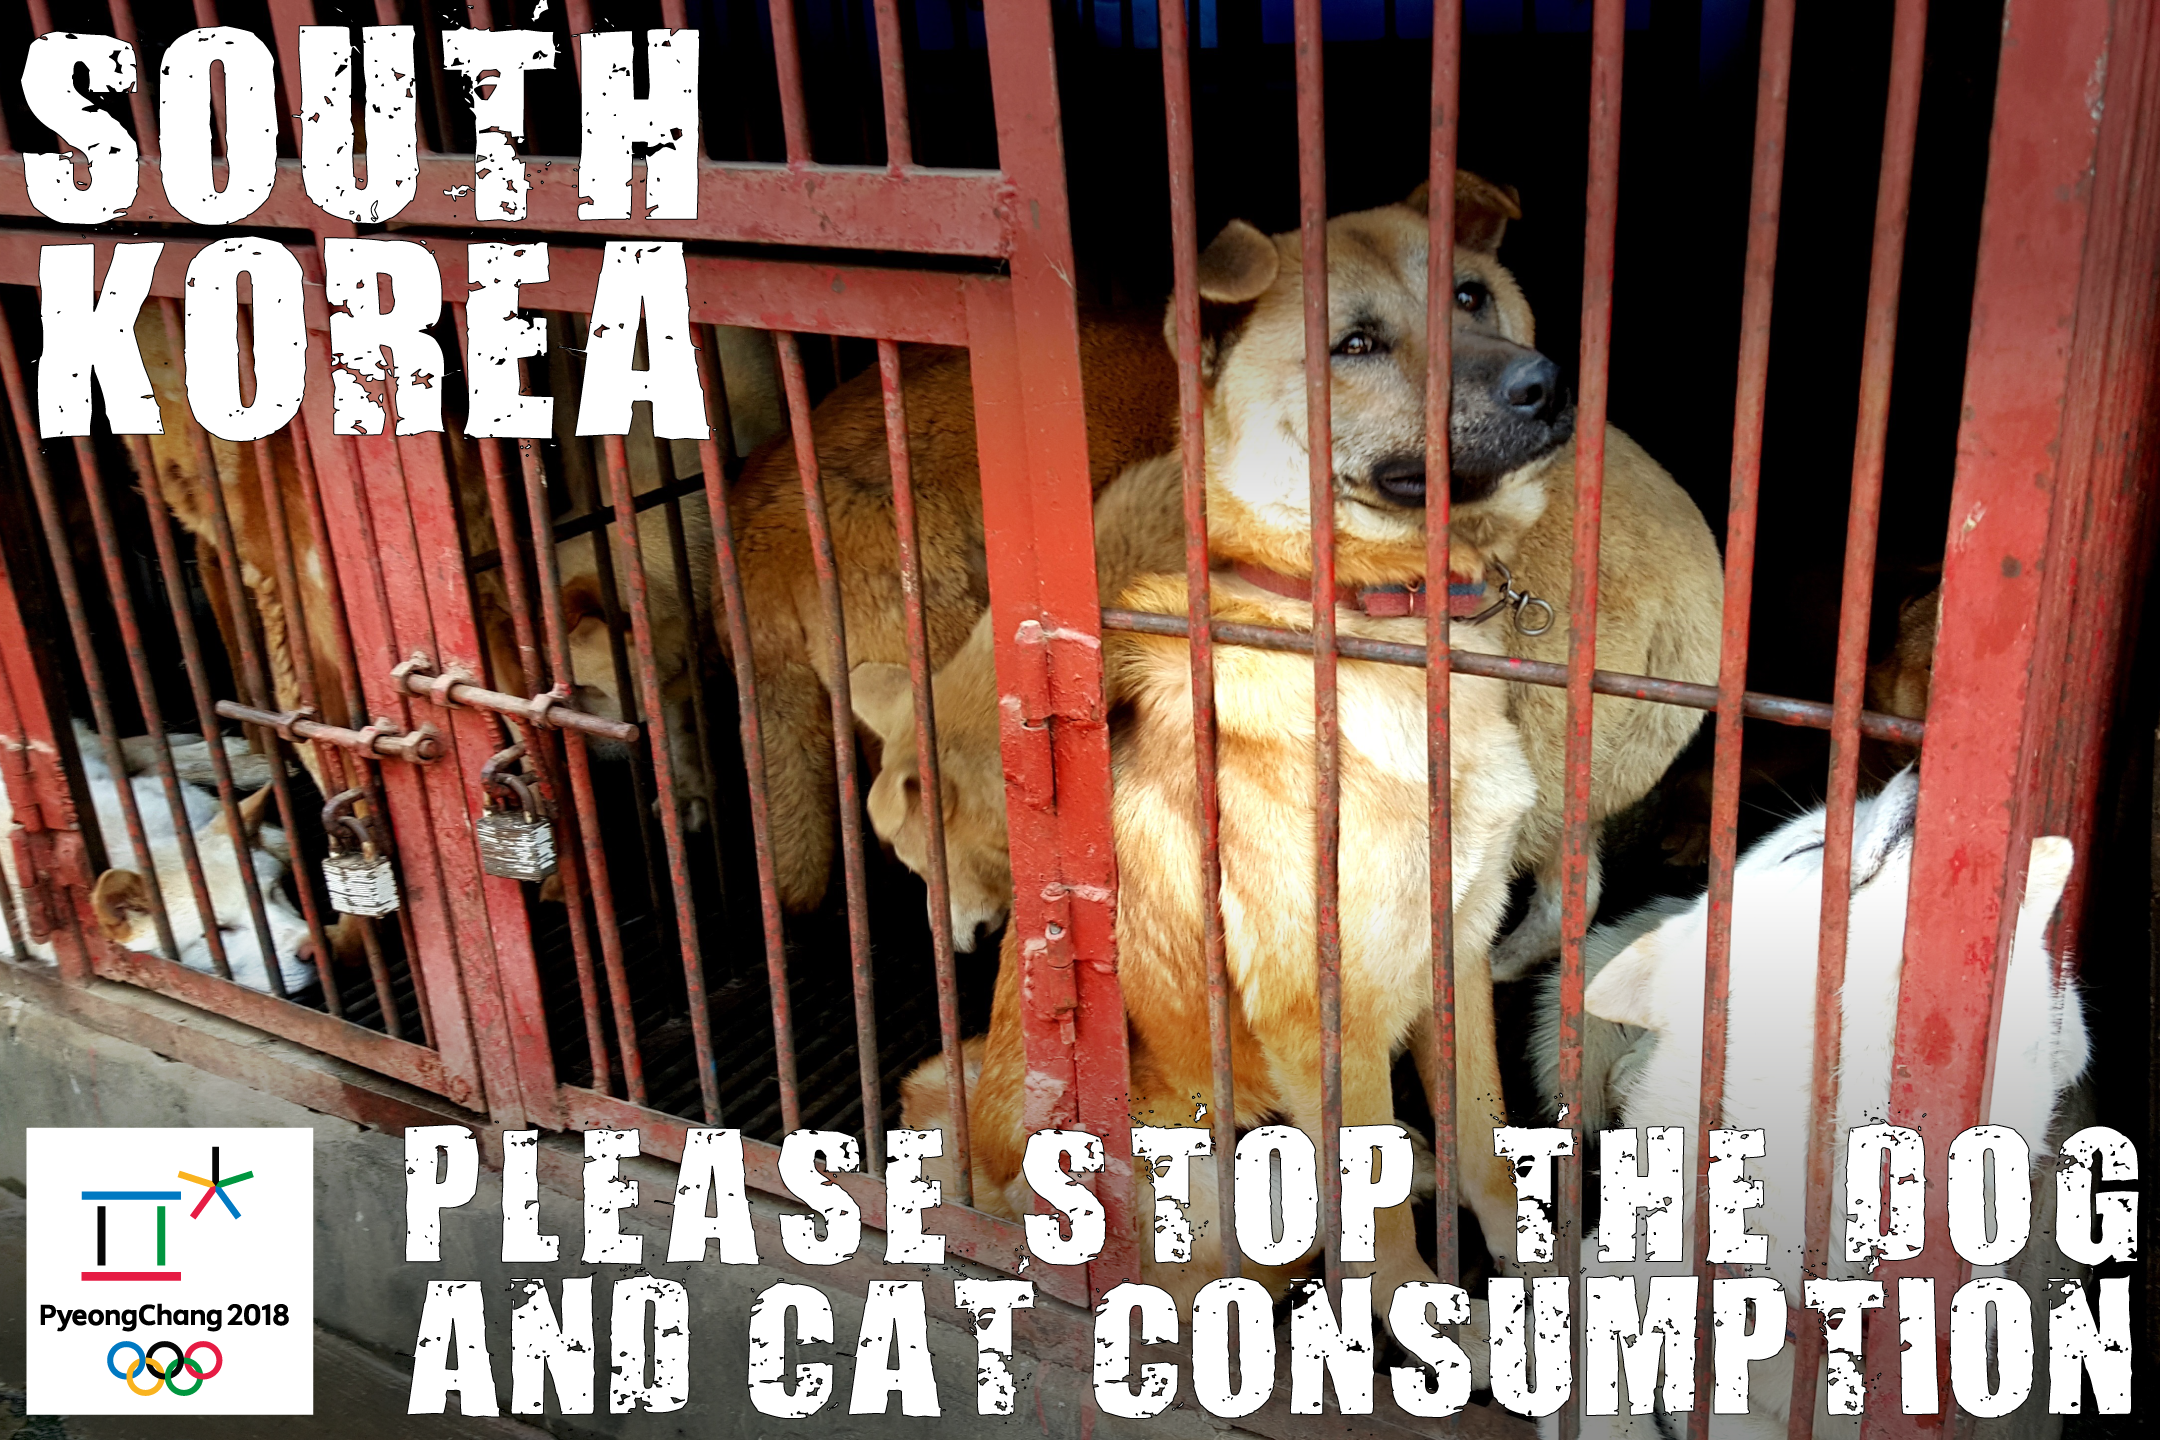 Pyeongchang’s project to hide the Dog Meat Restaurants from Olympic visitors!